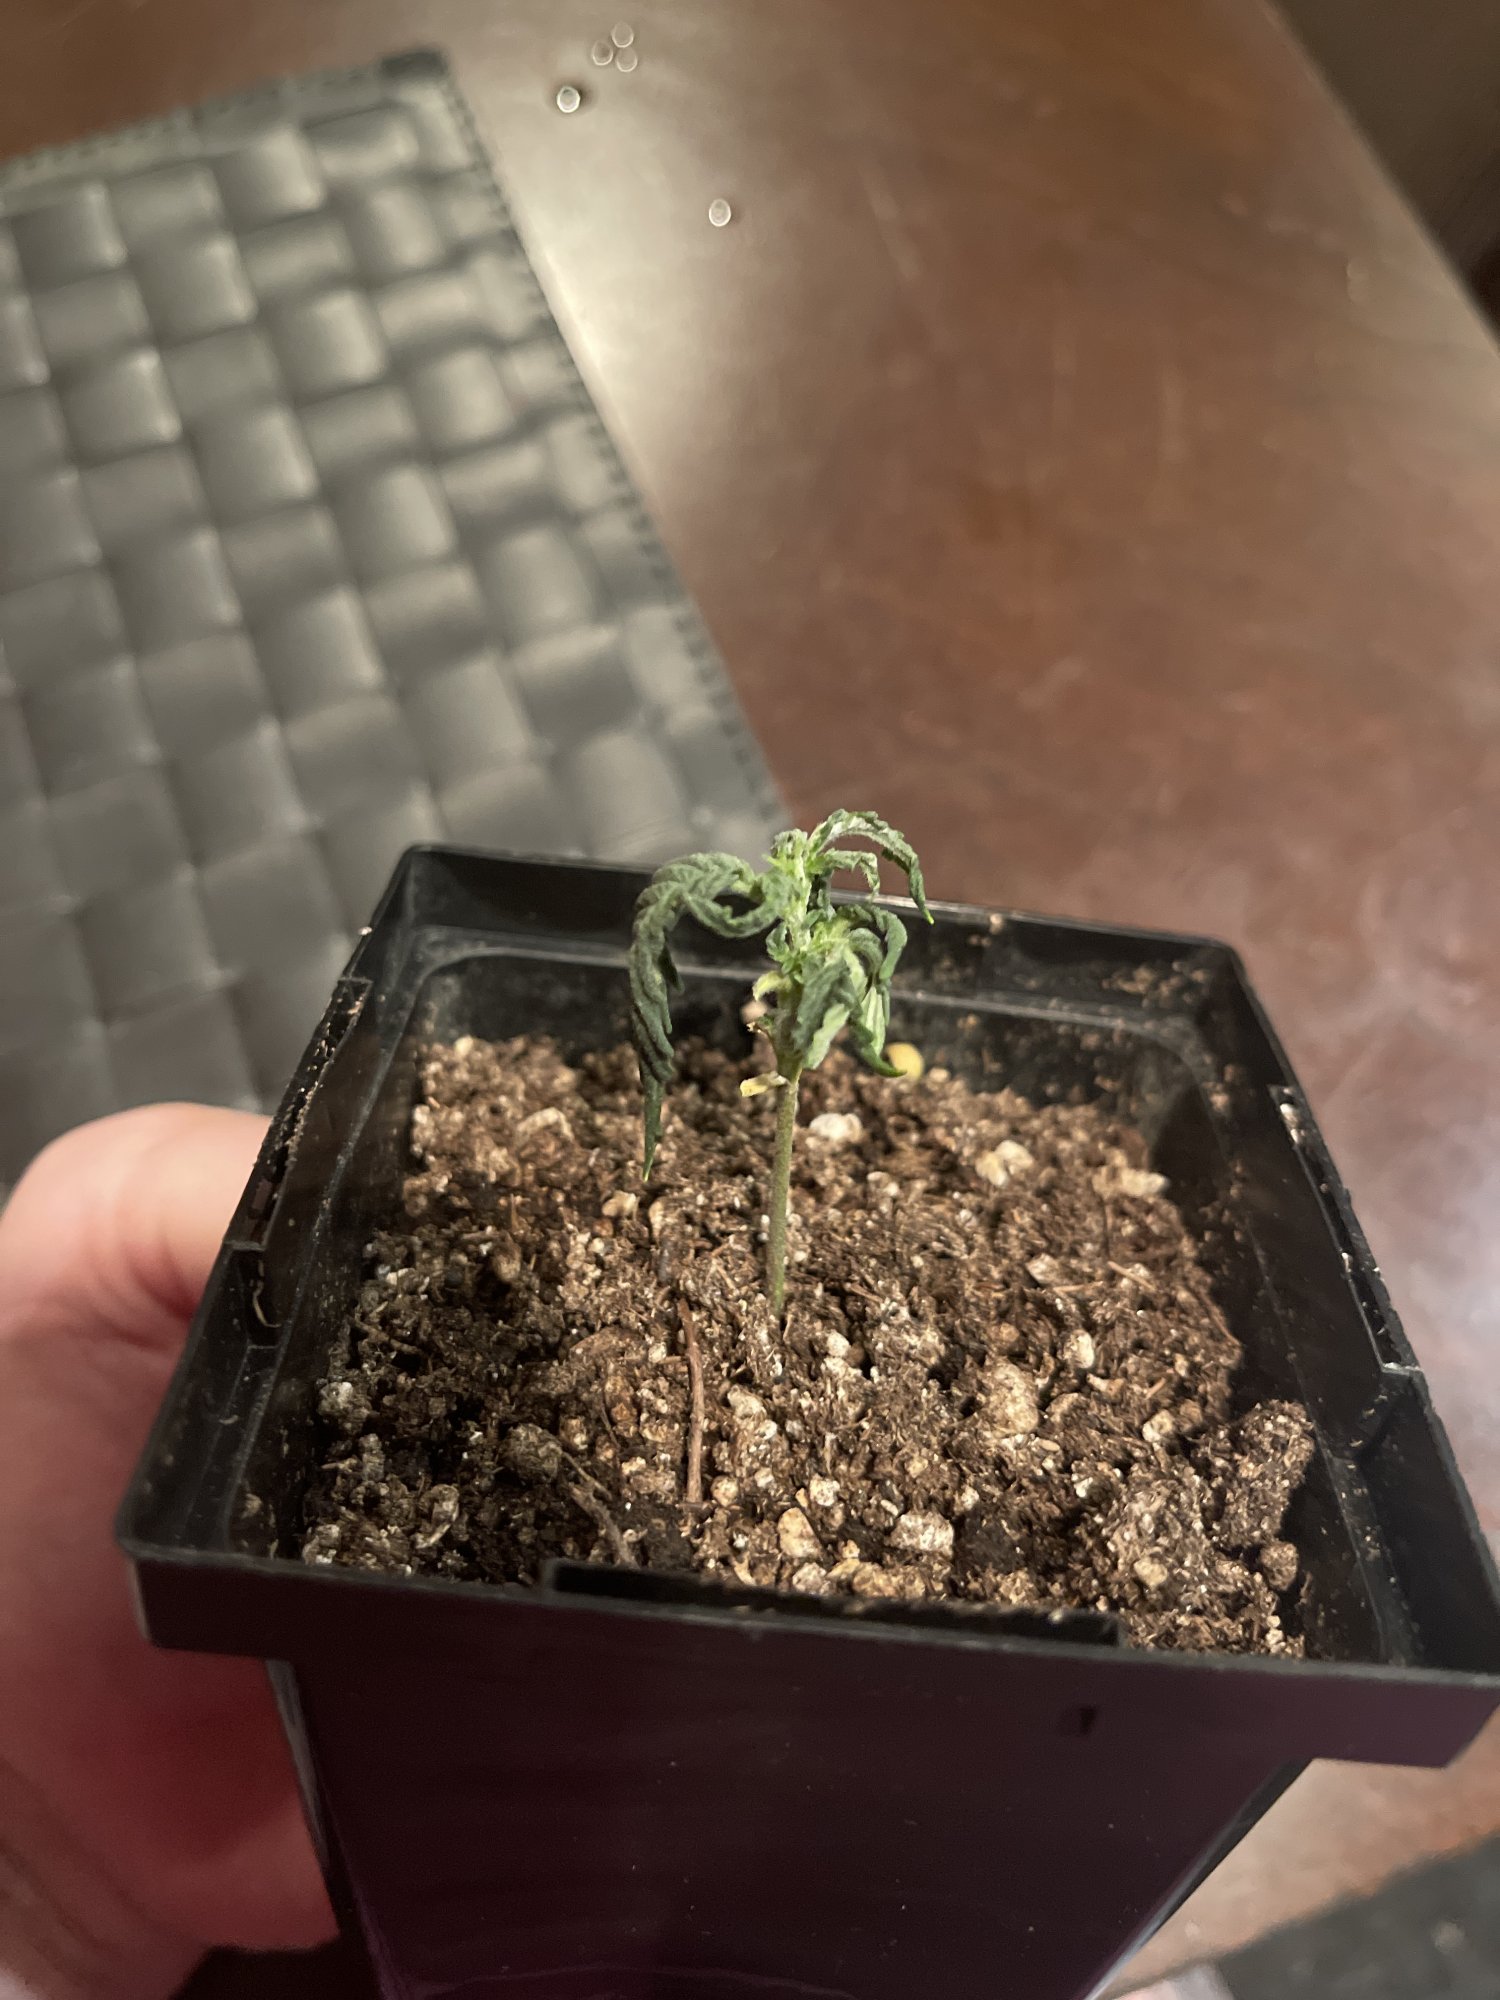 Help seedling was thriving and now is on her last legs 2